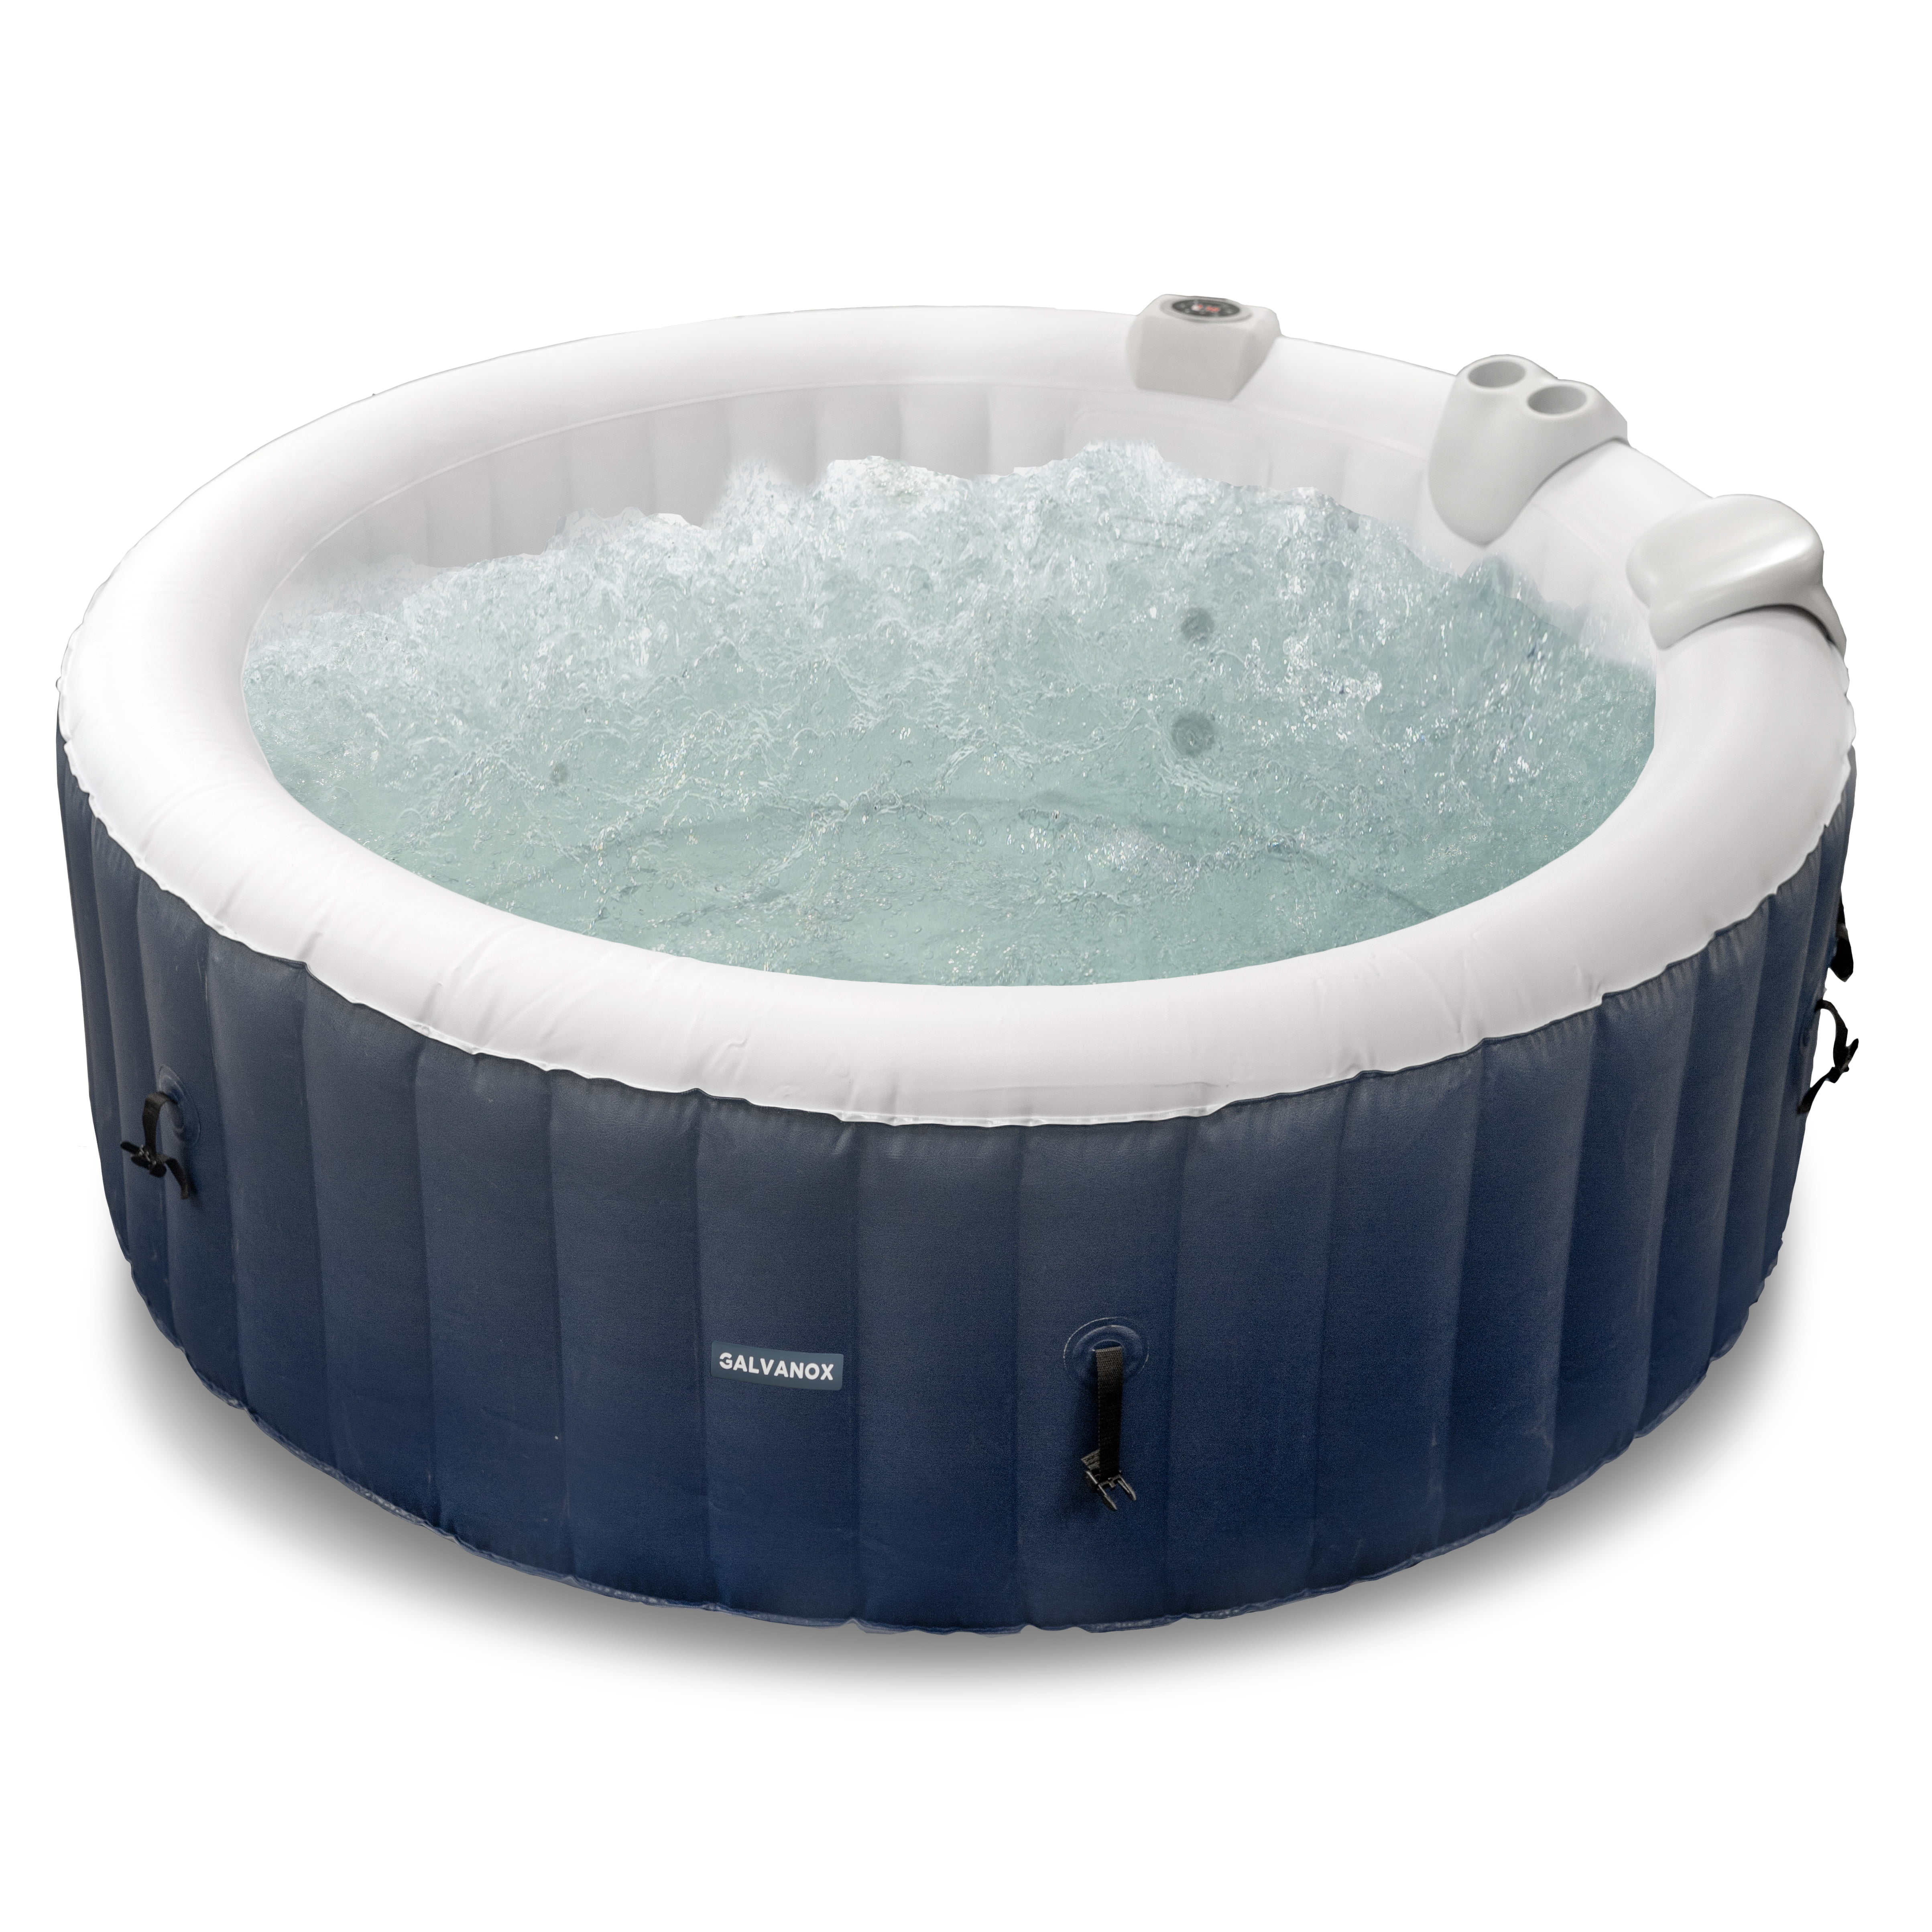 Inflatable Hot Tub 4 6 Person Blow Up Portable Spa With Built In Heater And Bubble Massage